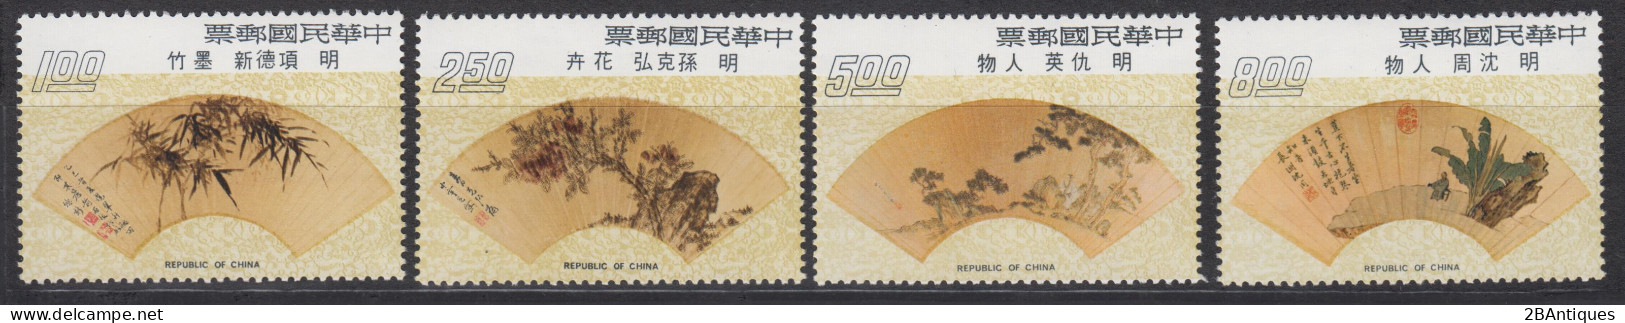 TAIWAN 1973 - Ancient Chinese Fan Paintings MNH** OG XF - Neufs